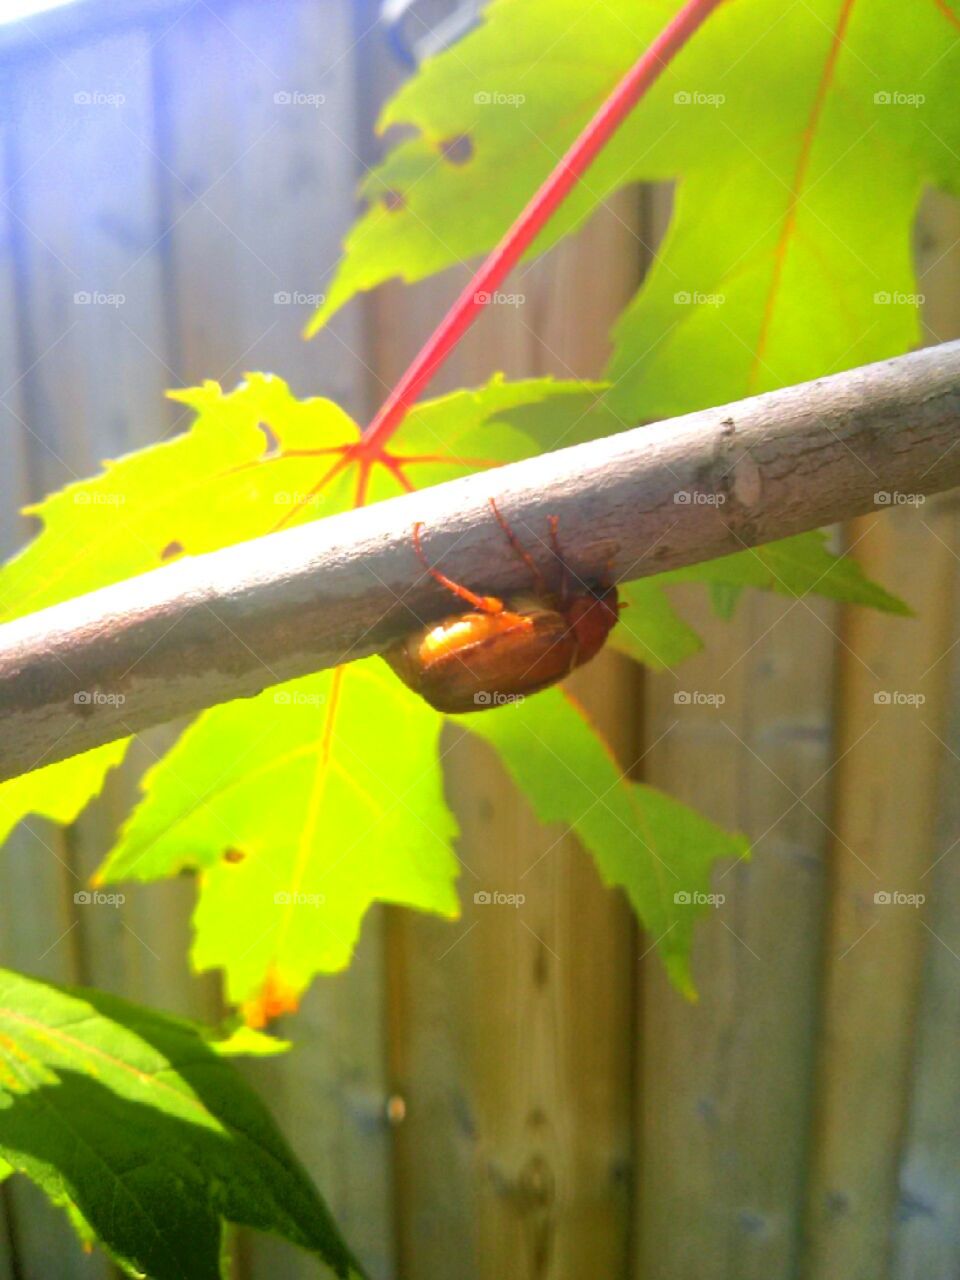 June Bug. Taken last year, saved this little June Bug from drowning.